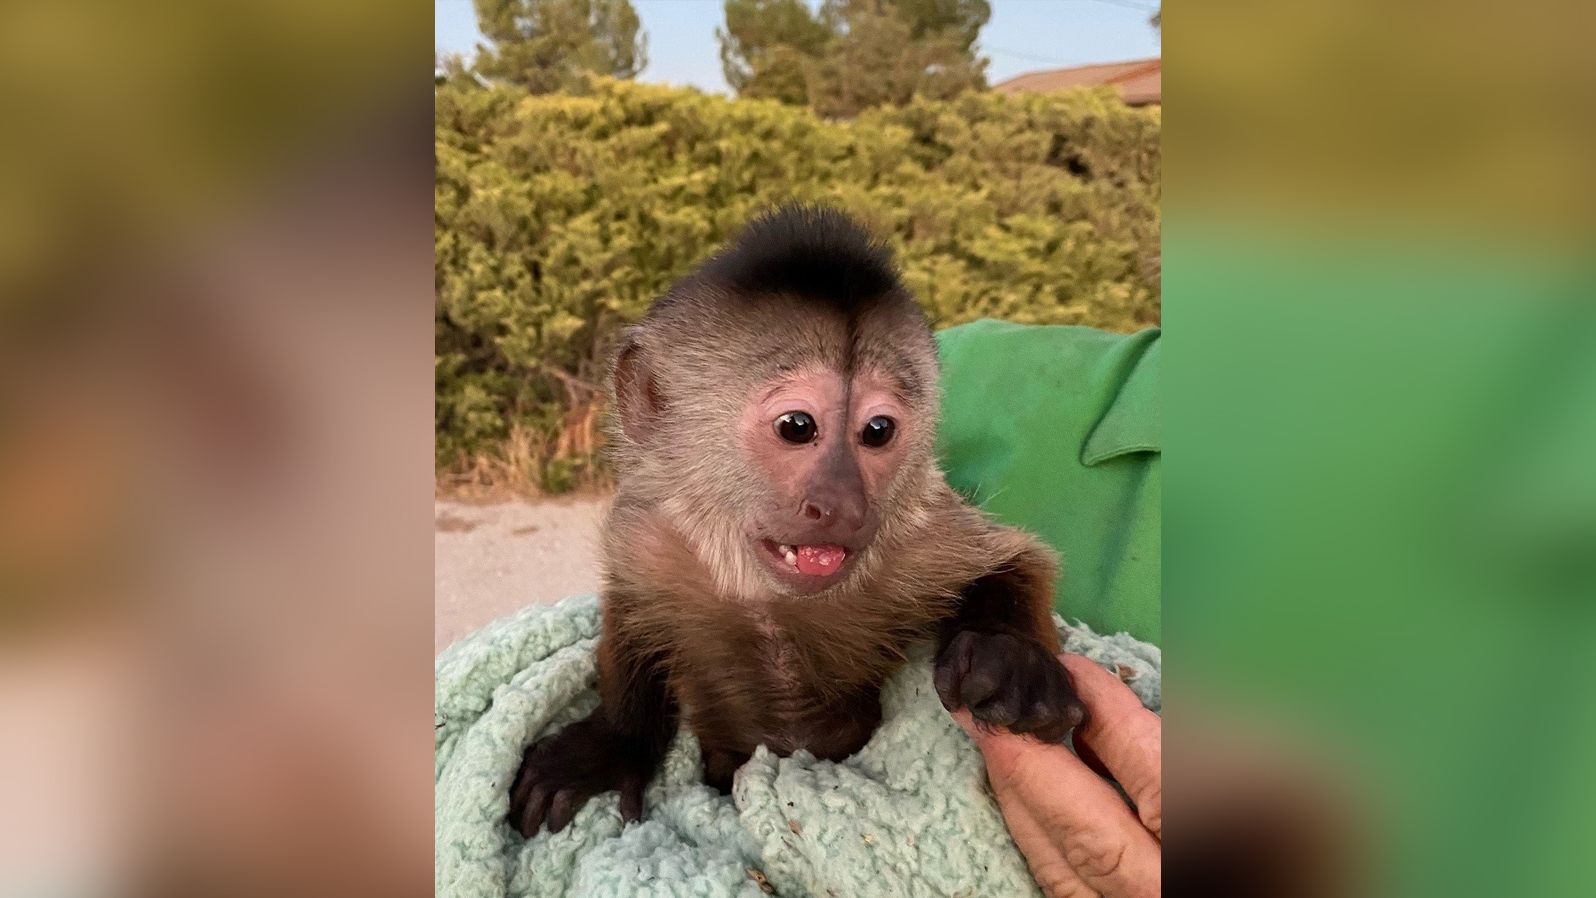 Route, a Capuchin monkey at Conservation Ambassadors, spurred police officers to investigate the zoo's office after she accidentally called 911.